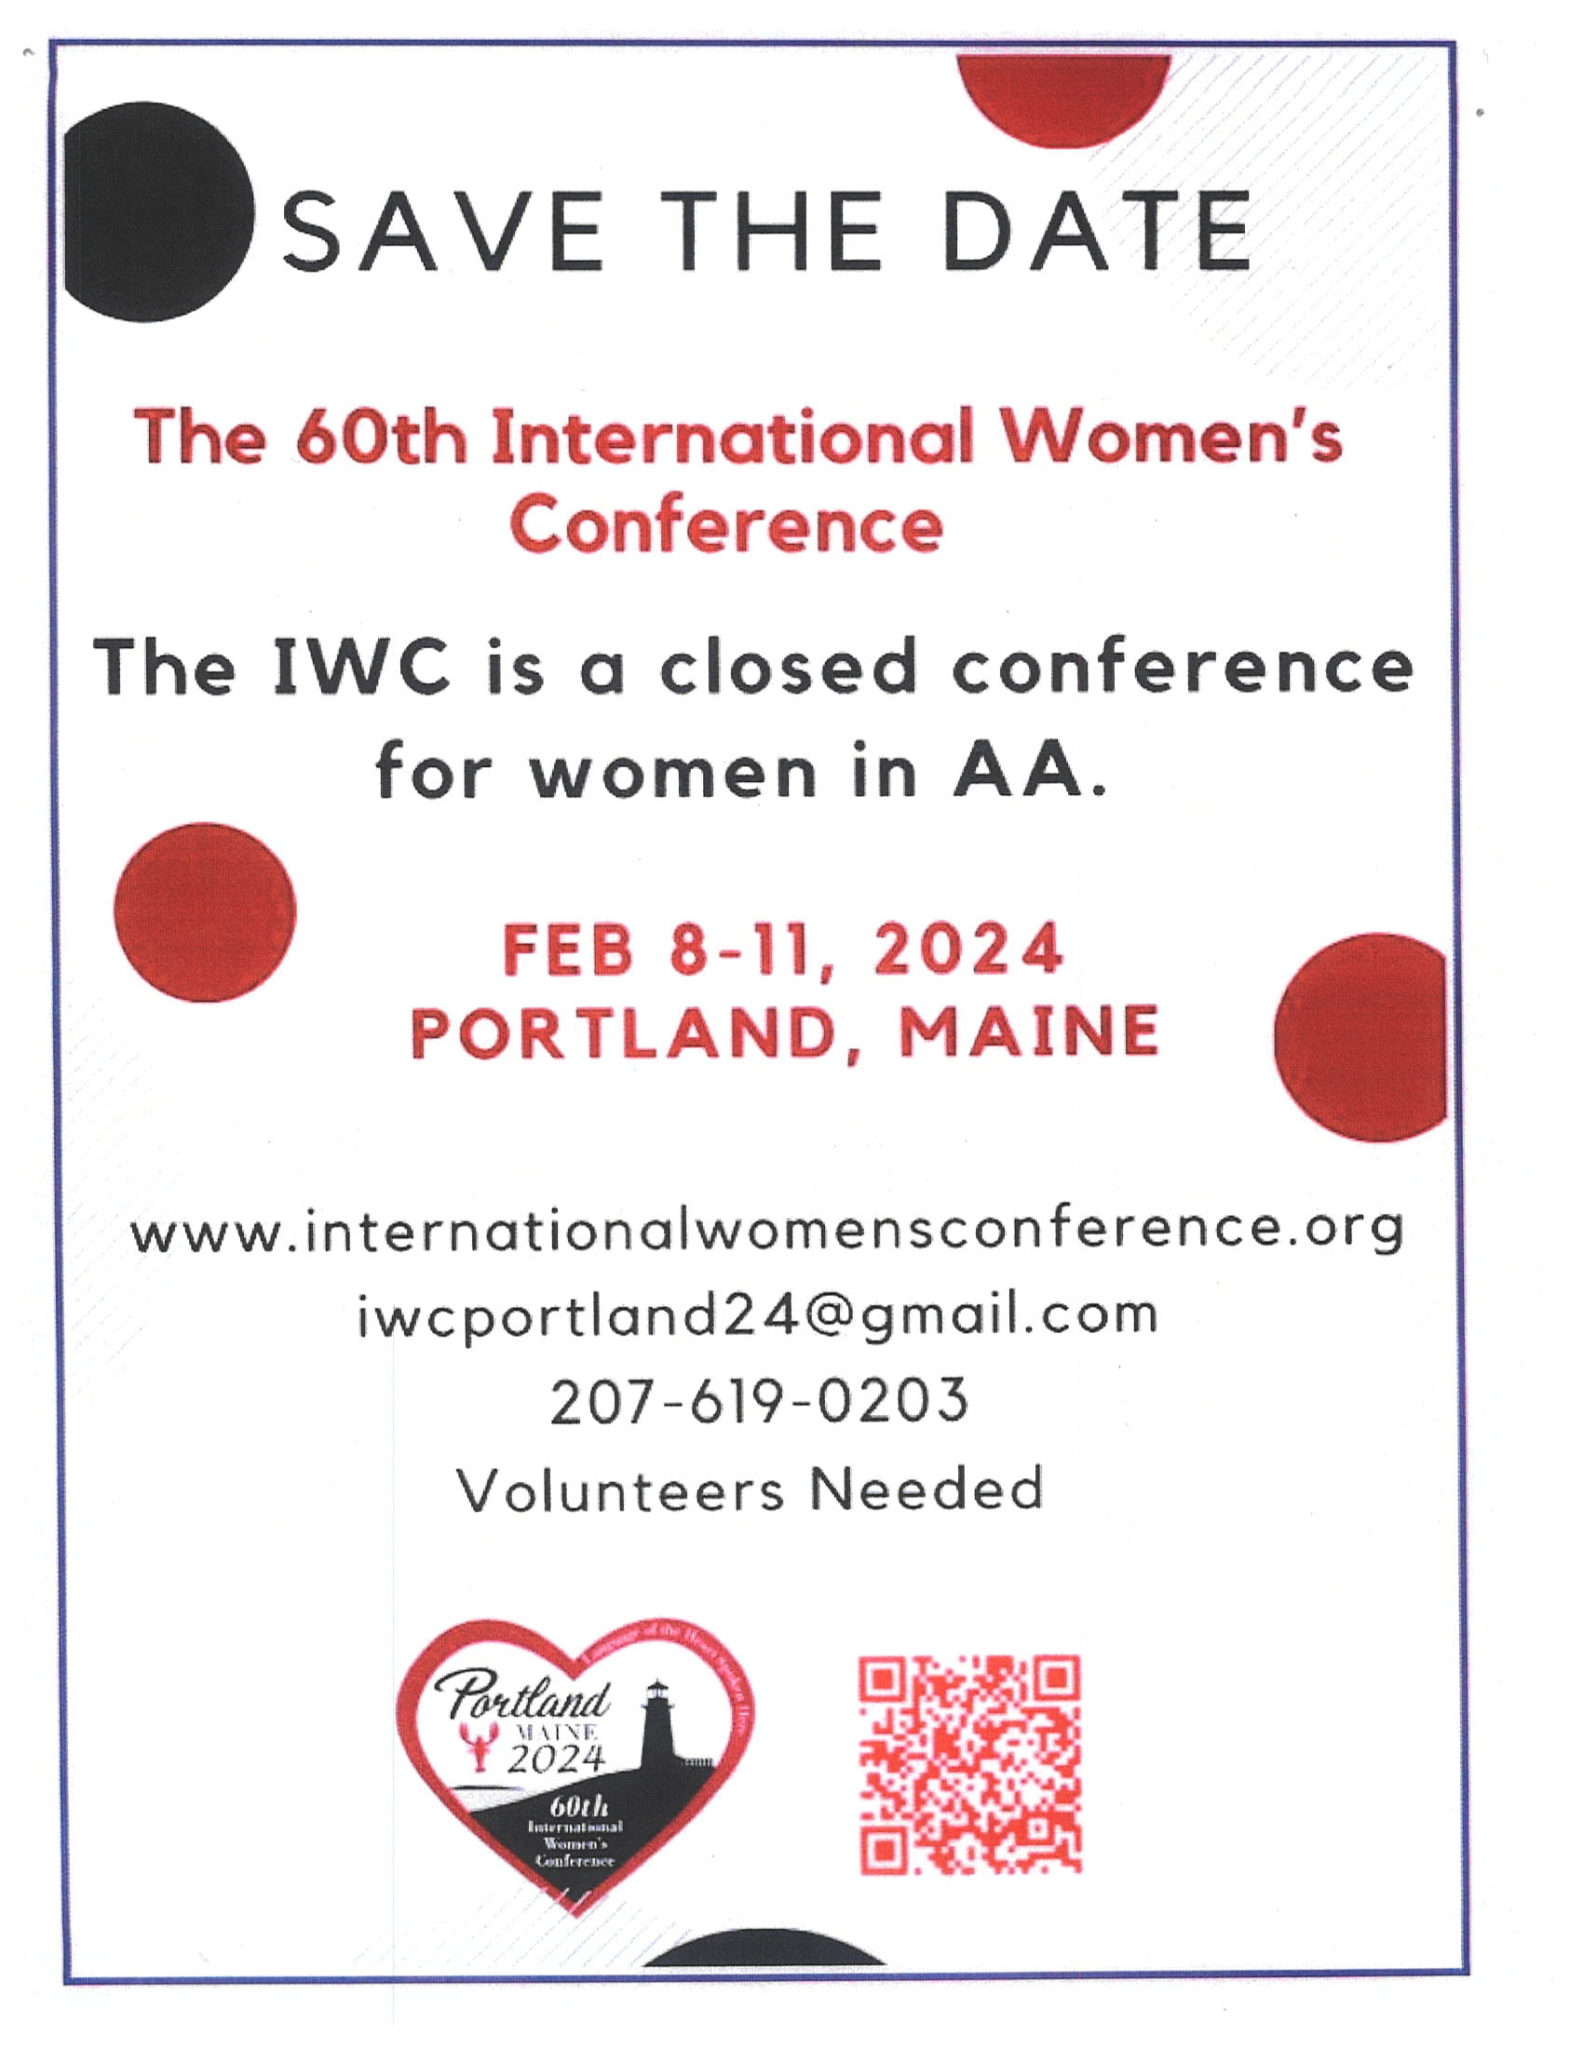 2024 The 60th International Women’s Conference in Portland, Maine